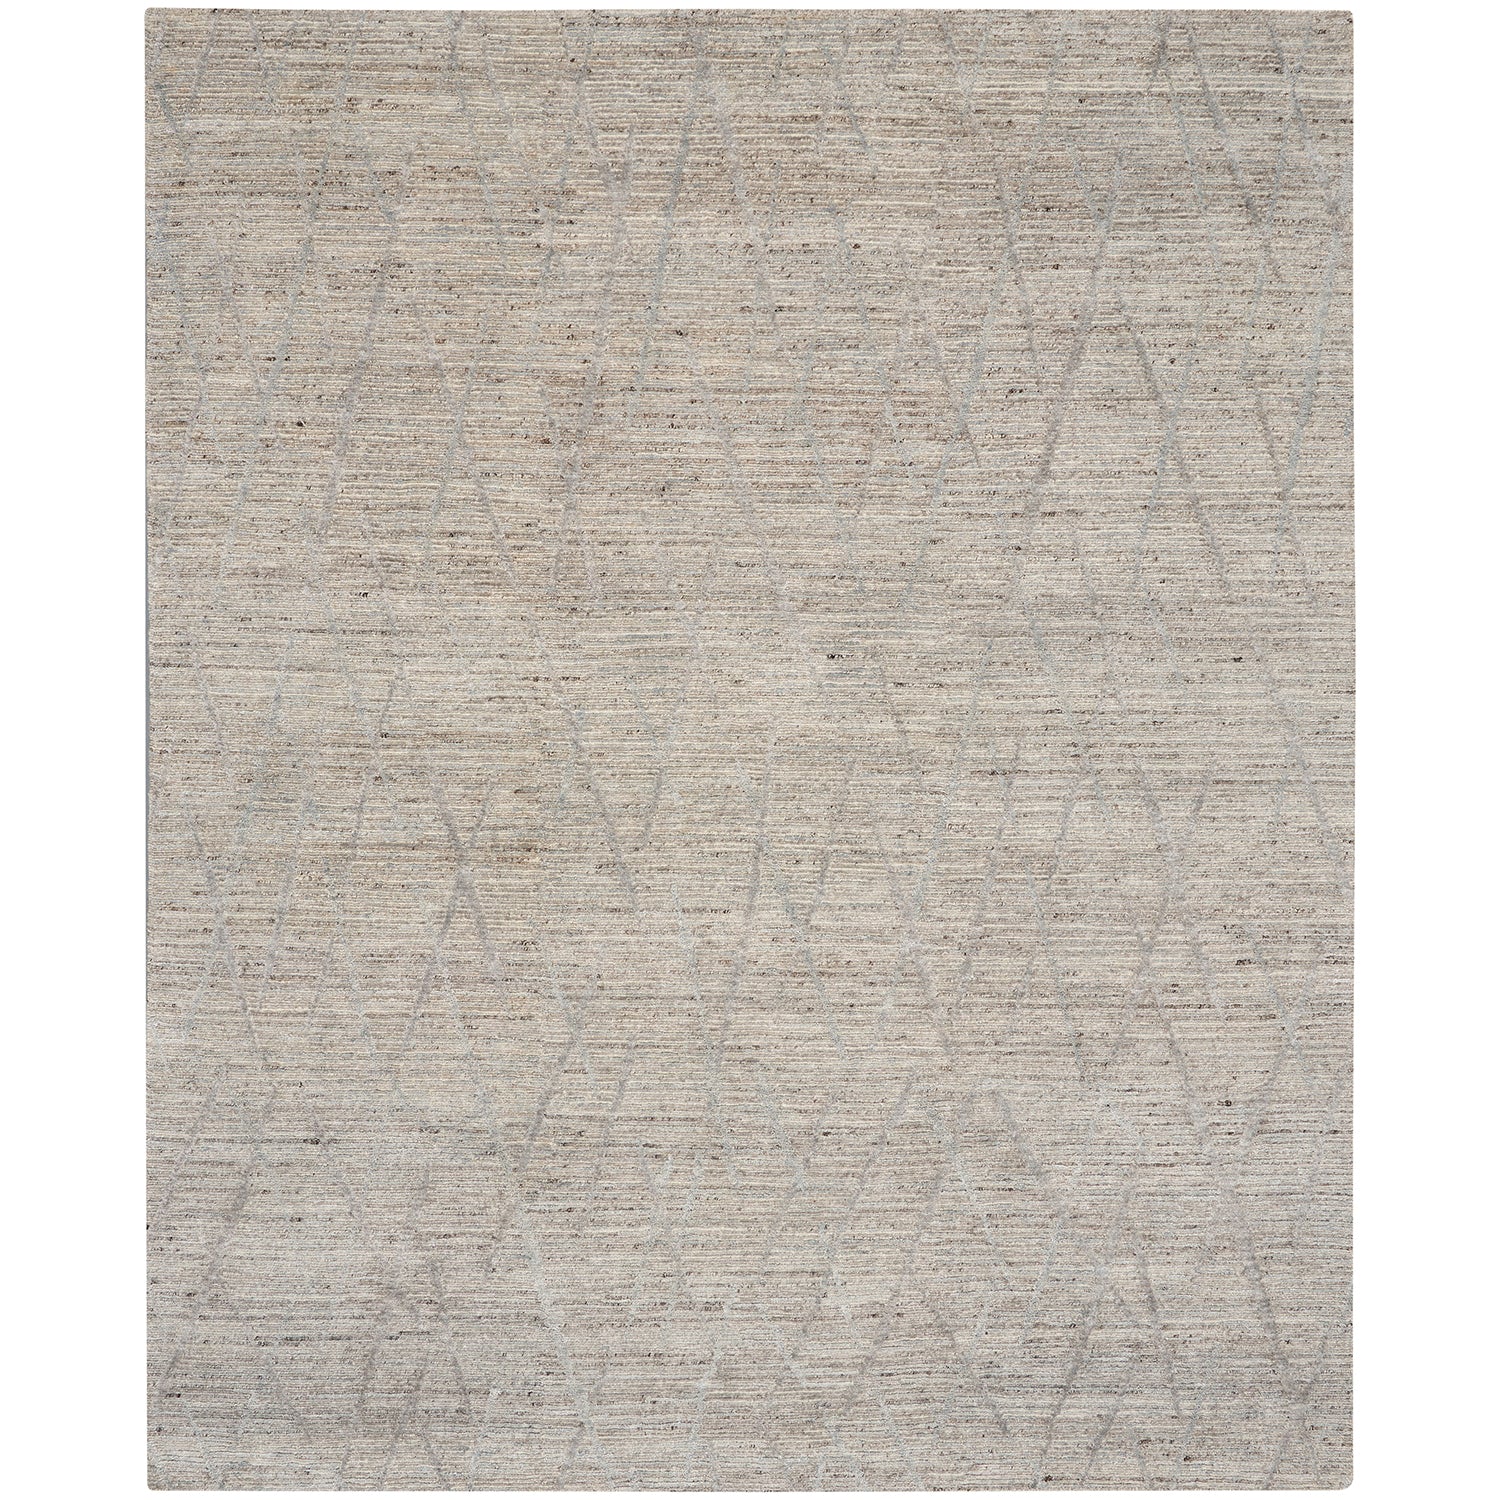 Modern neutral rug with abstract pattern adds sophistication to interiors.